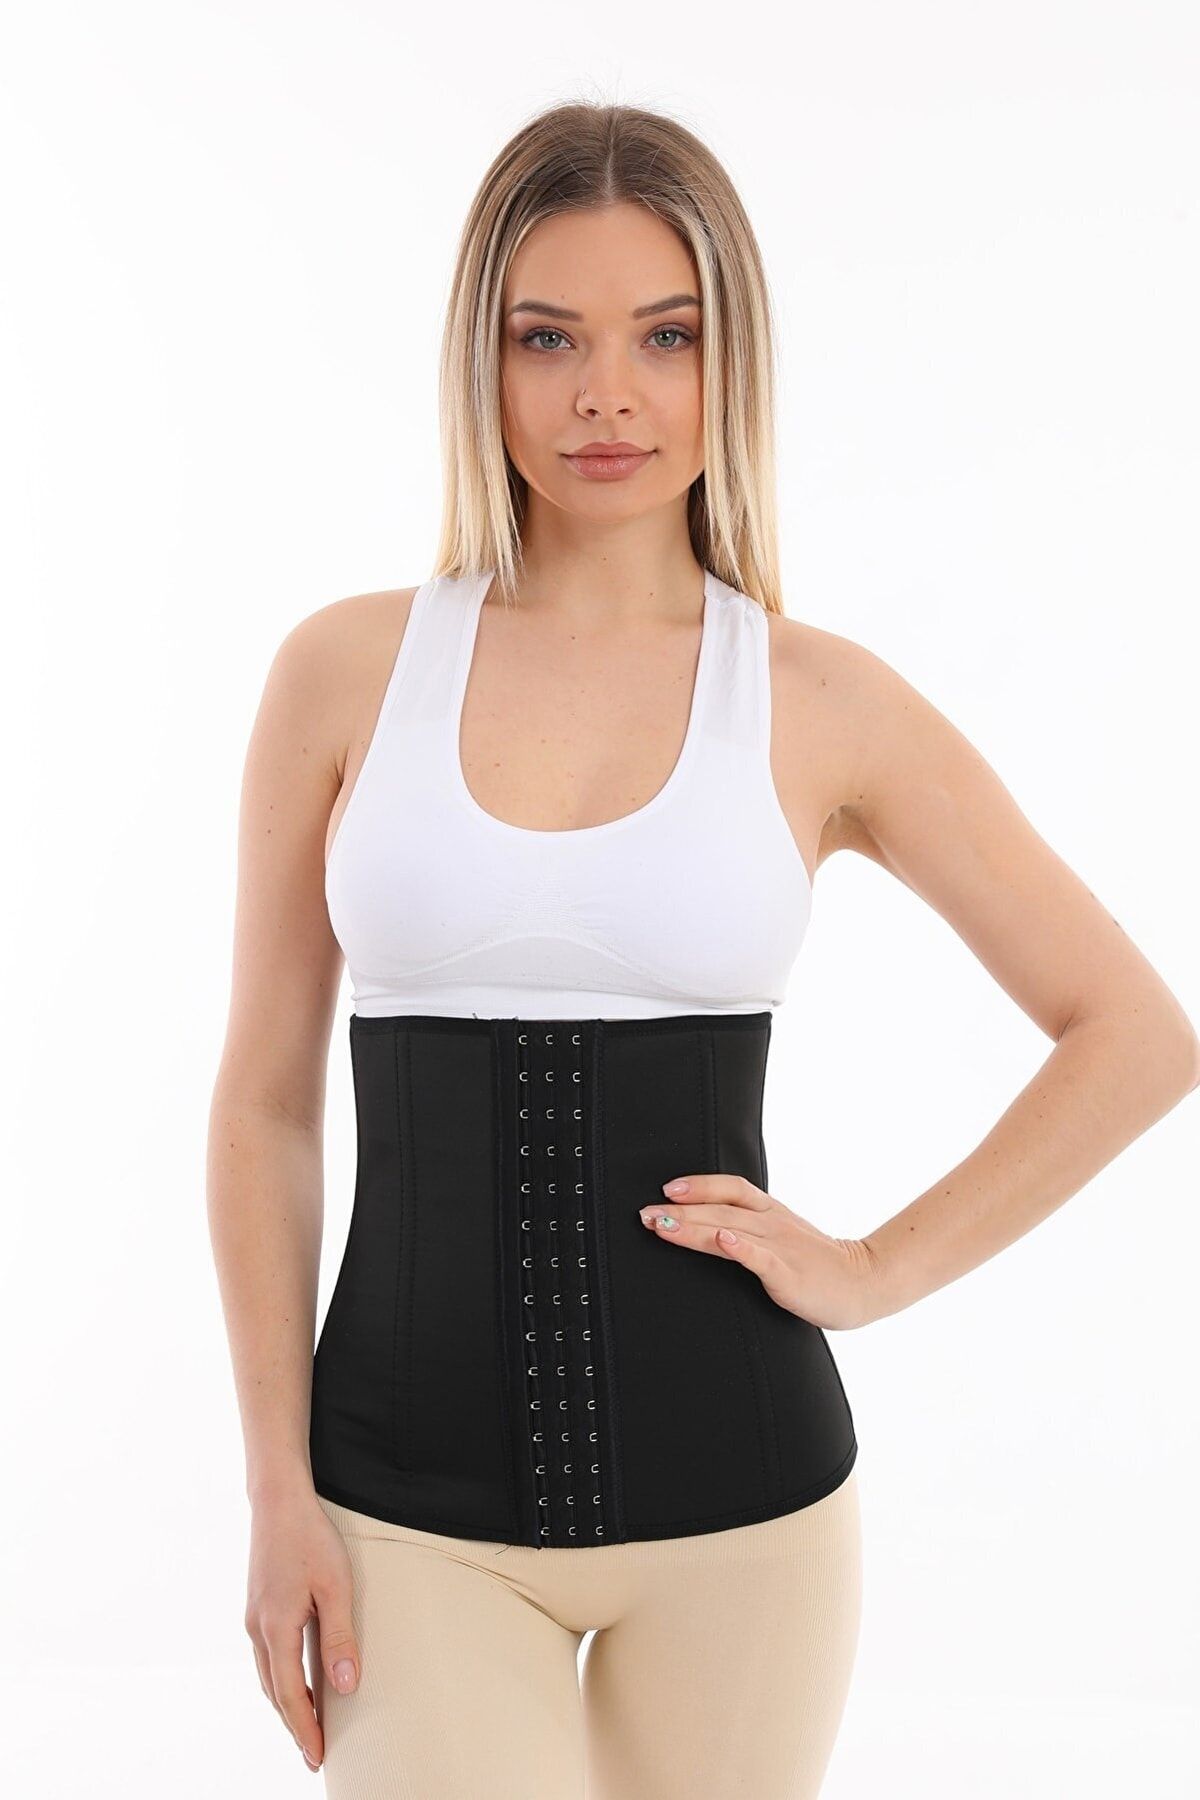 Do Corsets Help with Posture?